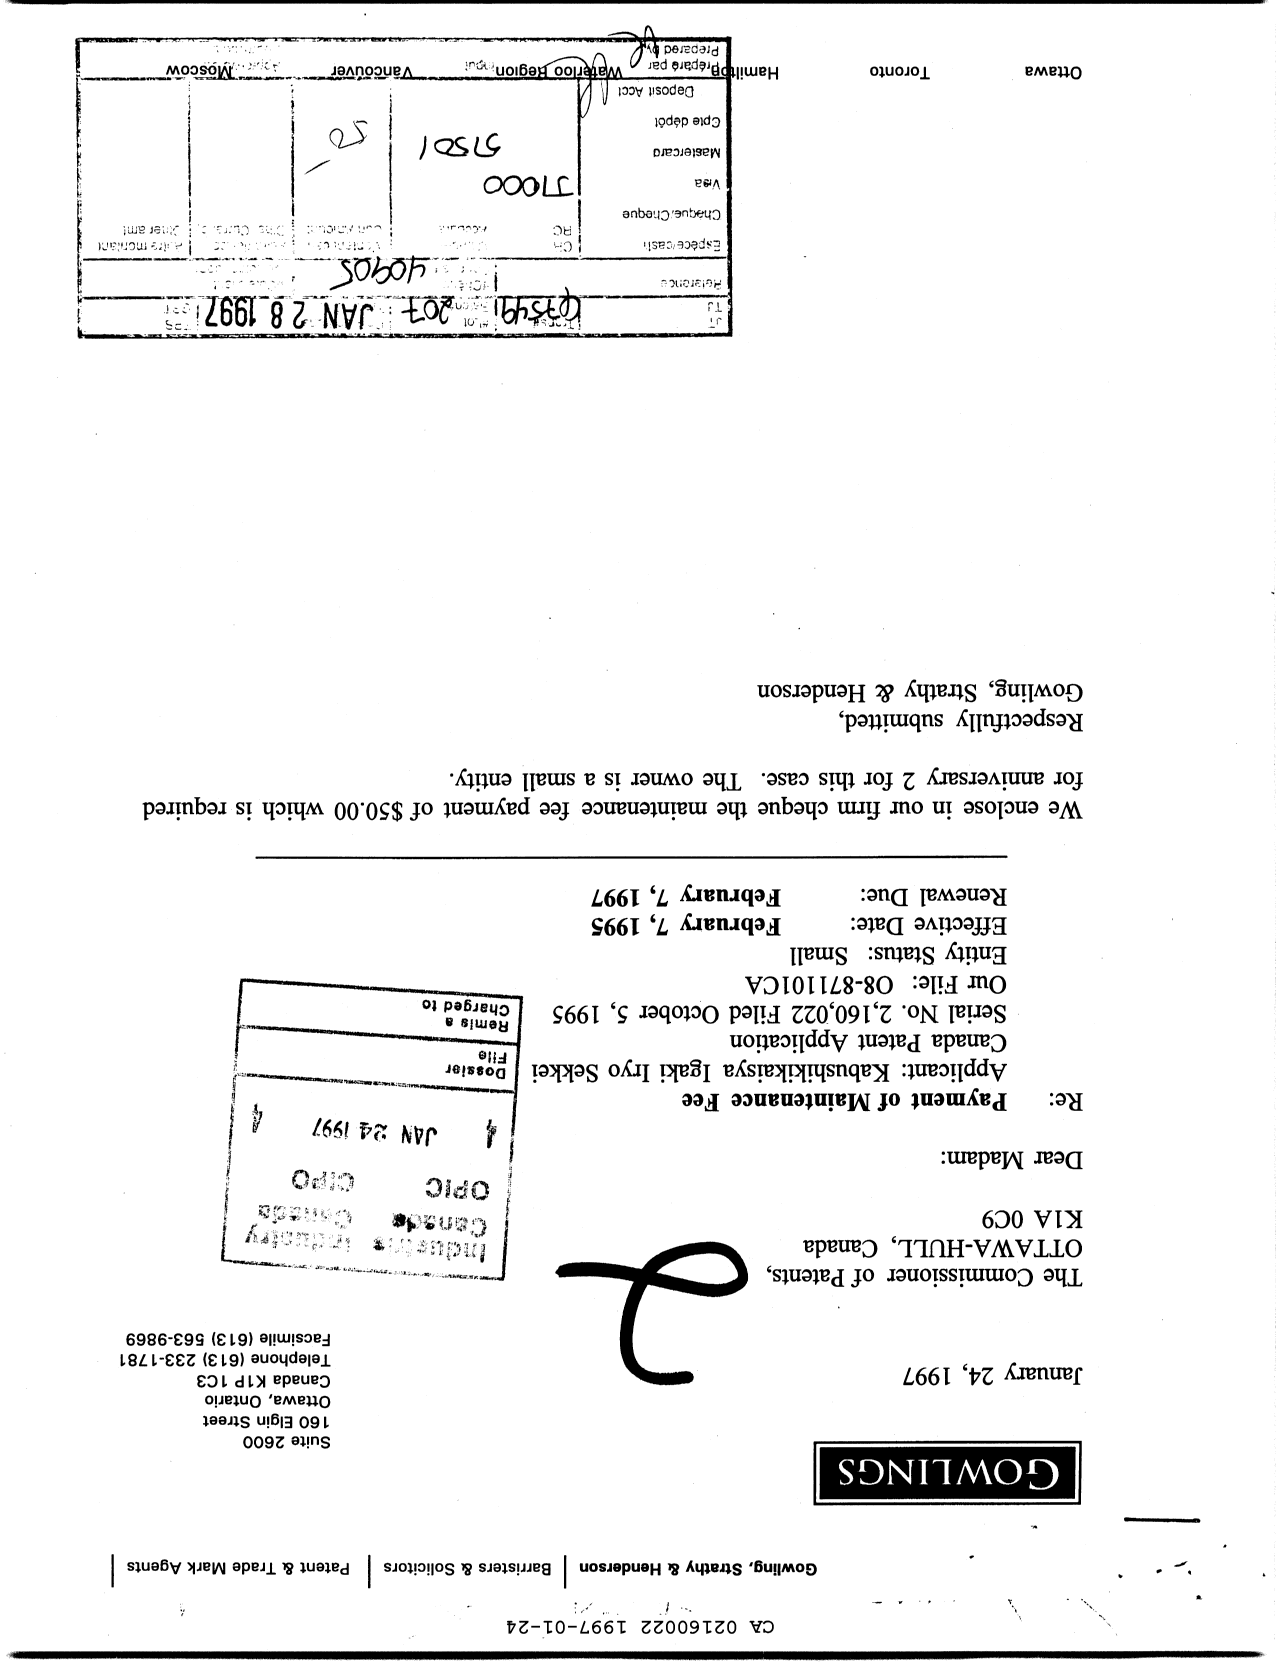 Canadian Patent Document 2160022. Fees 19970124. Image 1 of 1